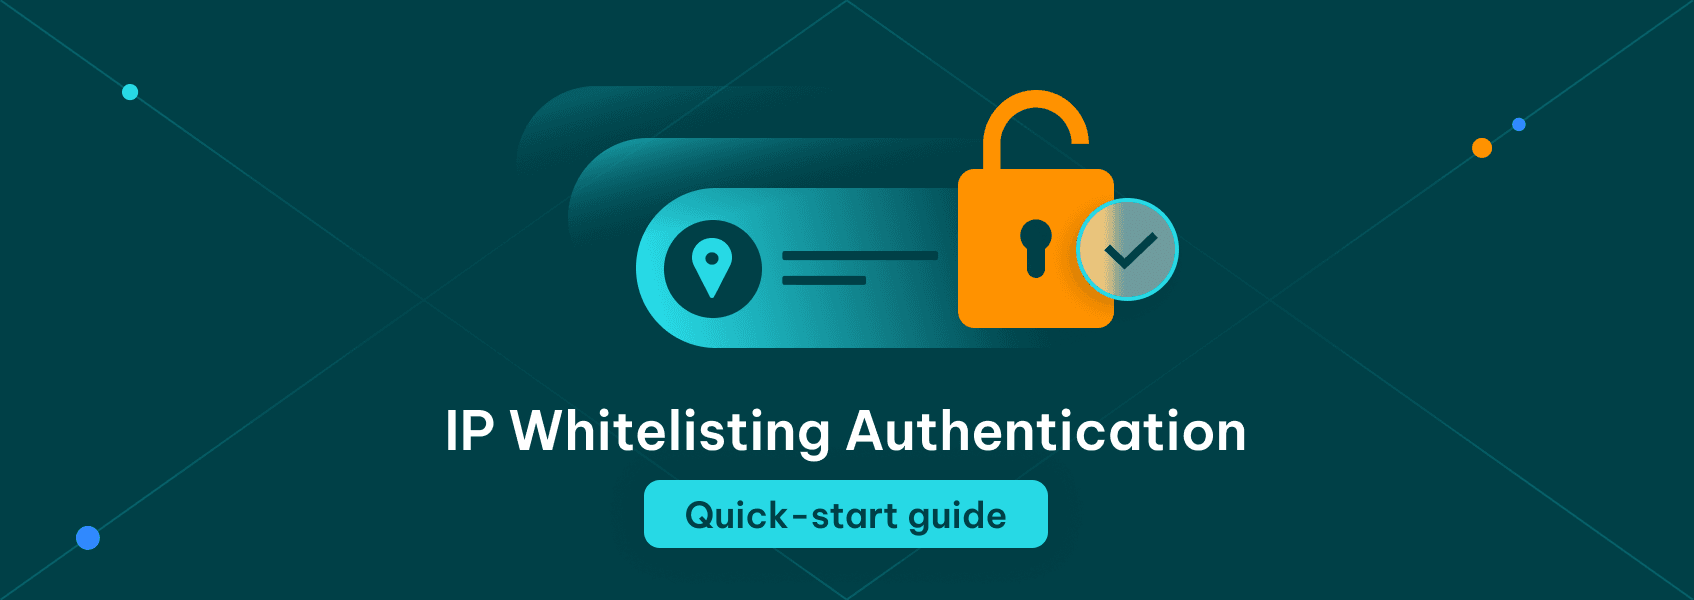 IP whitelisting quick-start guide featured